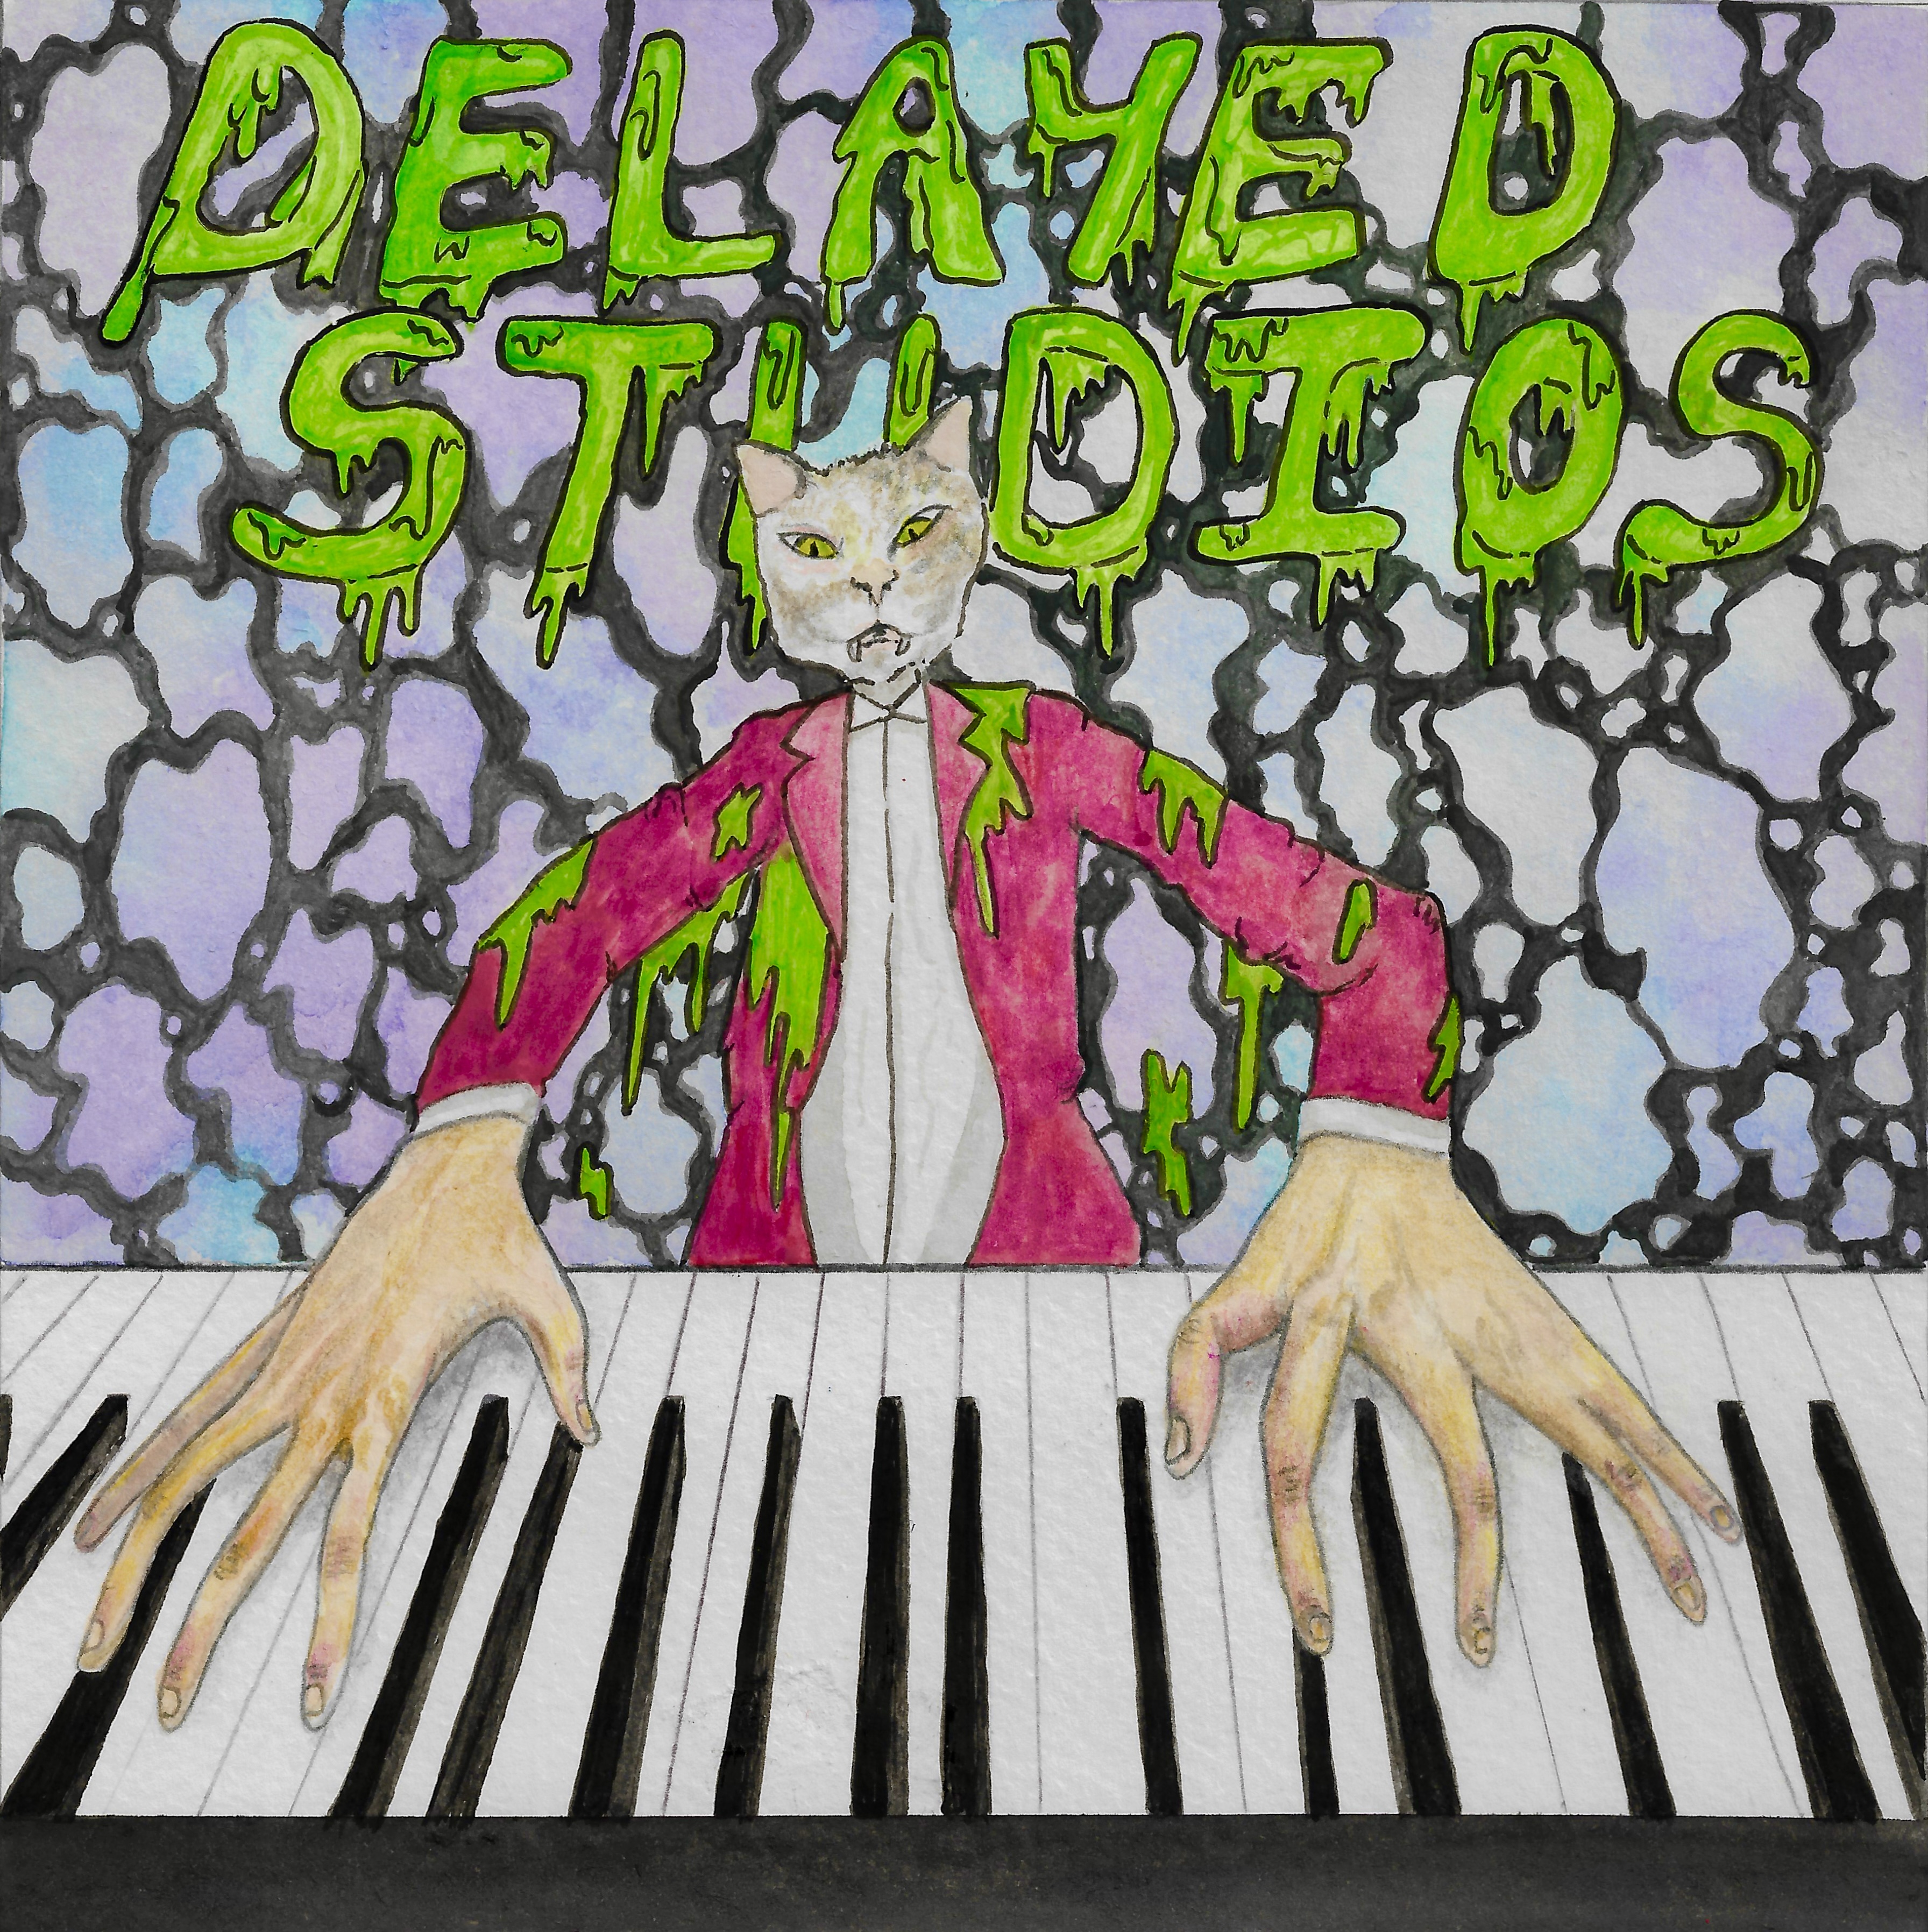 waterpaint/colour pencil illustration of a cat/human character playing the keys, a poster made for delayed studios